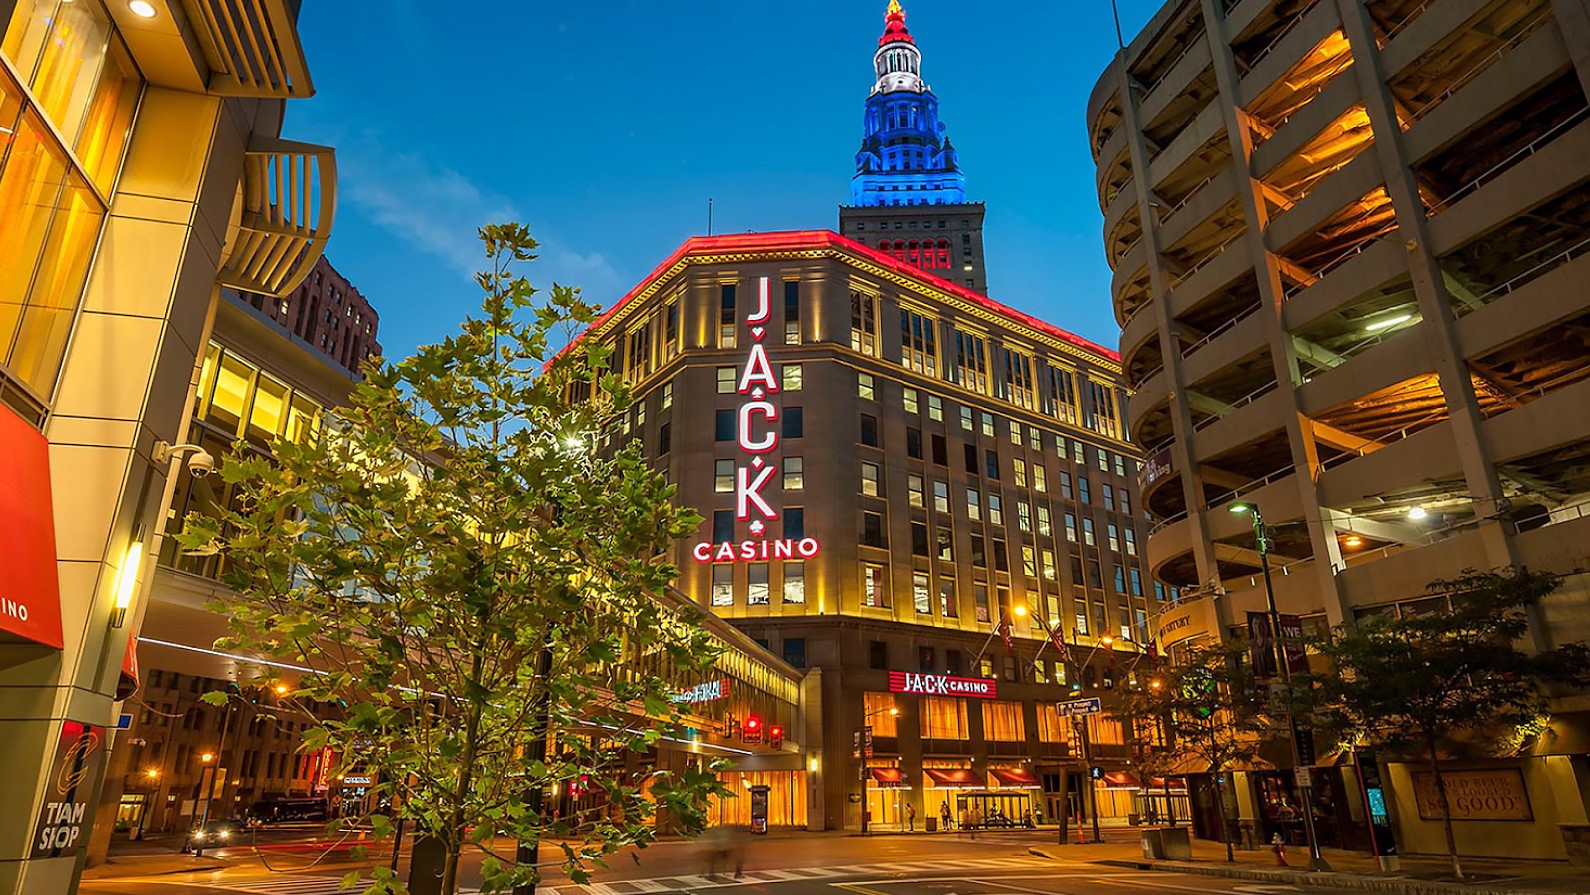 Ohio's JACK Cleveland Casino celebrates 10th anniversary with giveaways, employee recognitions